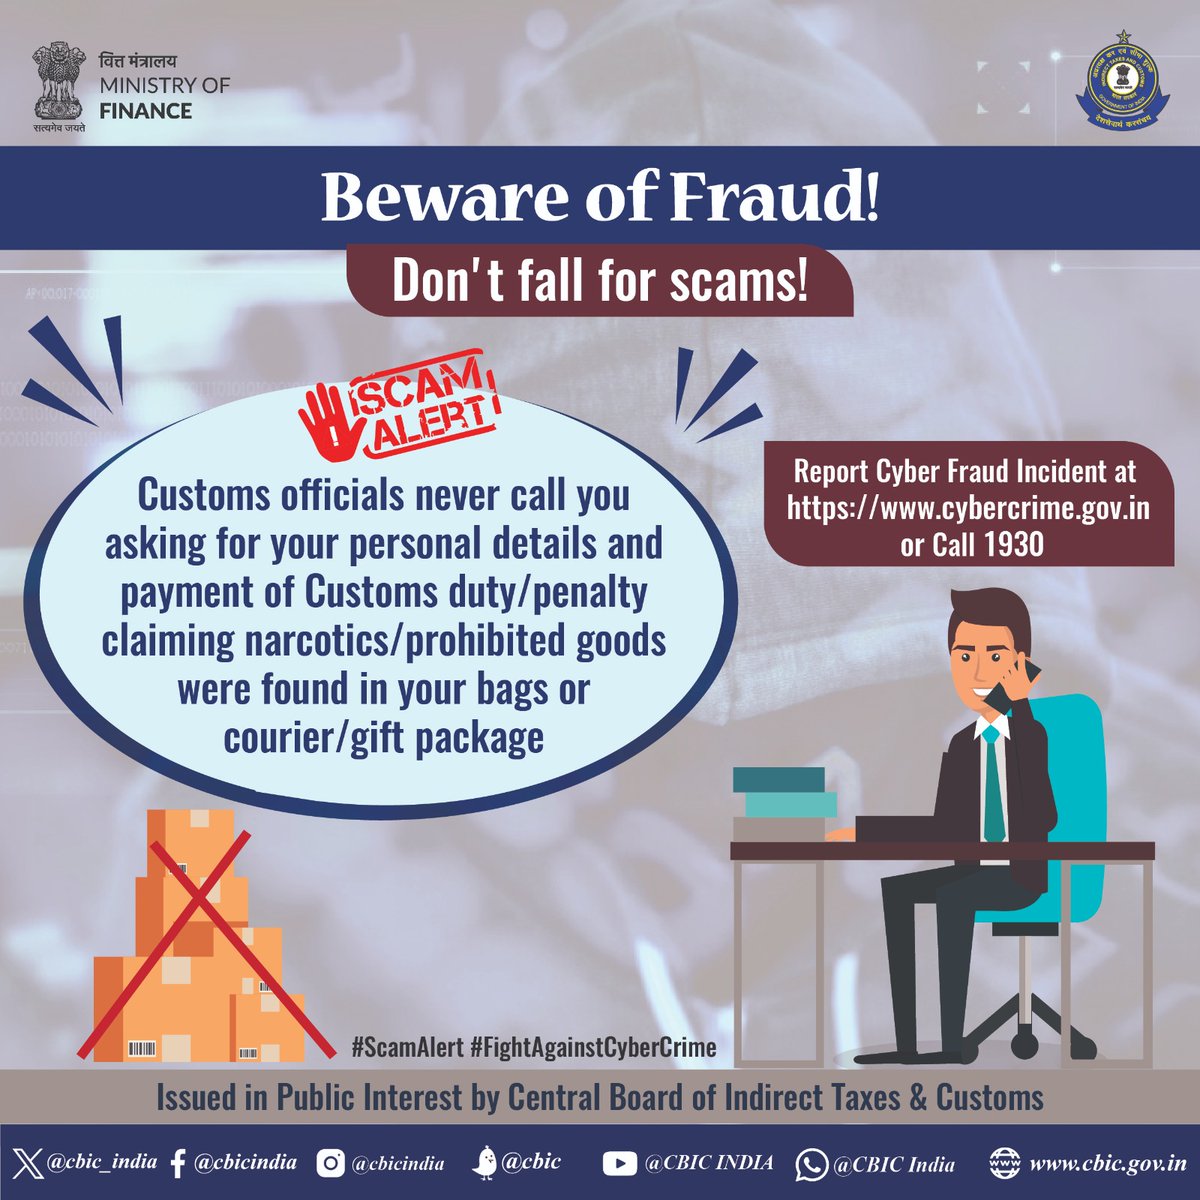 Beware of frauds in the name of Indian Customs!